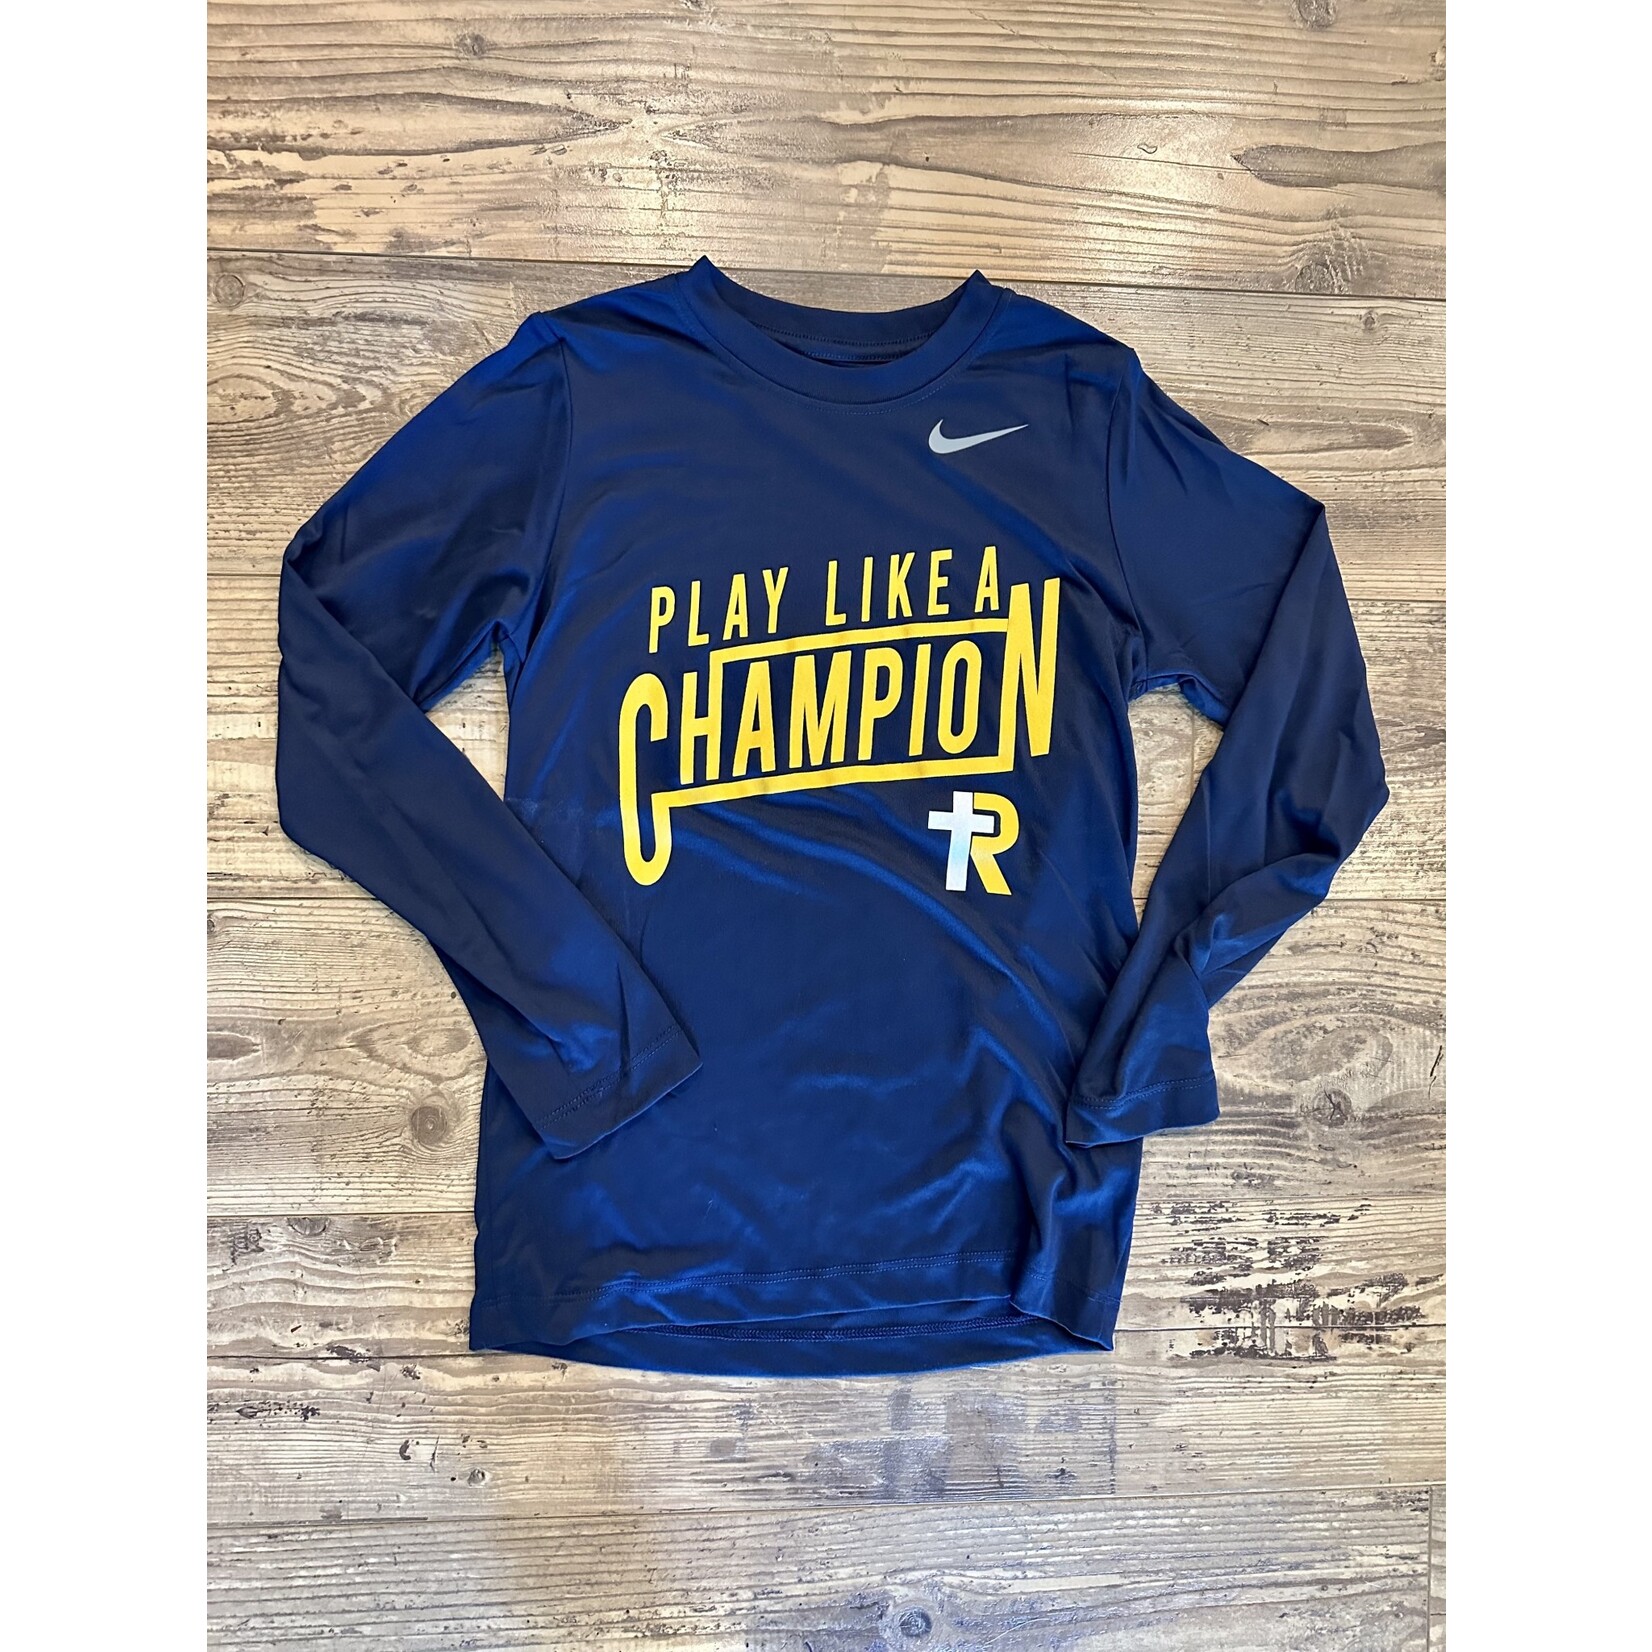 Nike Legend Play Like A Champ LS--Youth Navy